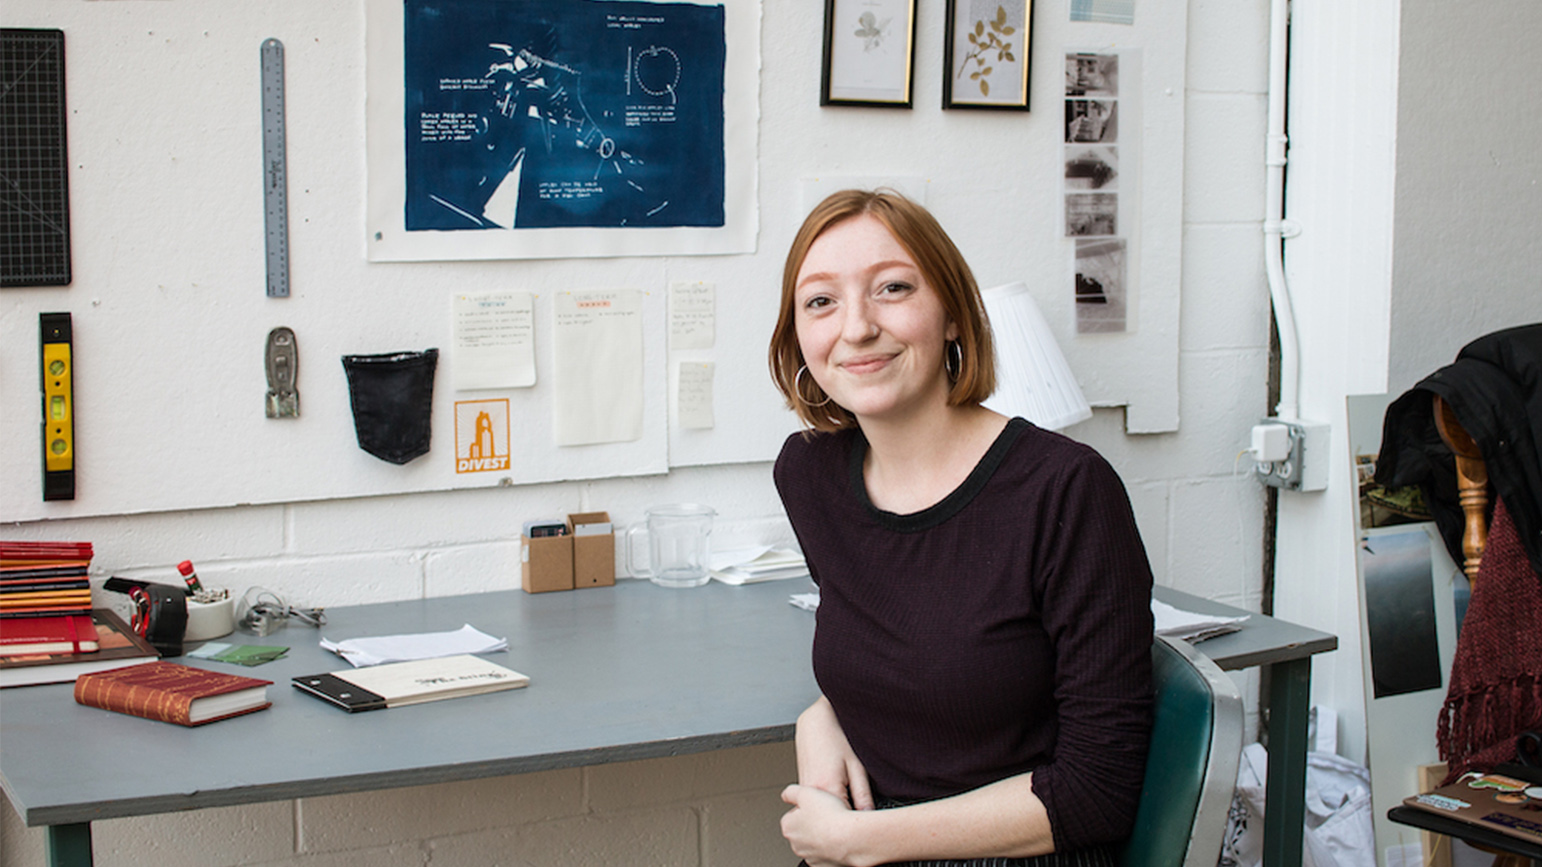 Photograph of Taylor Vence in her studio at Carnegie Mellon University